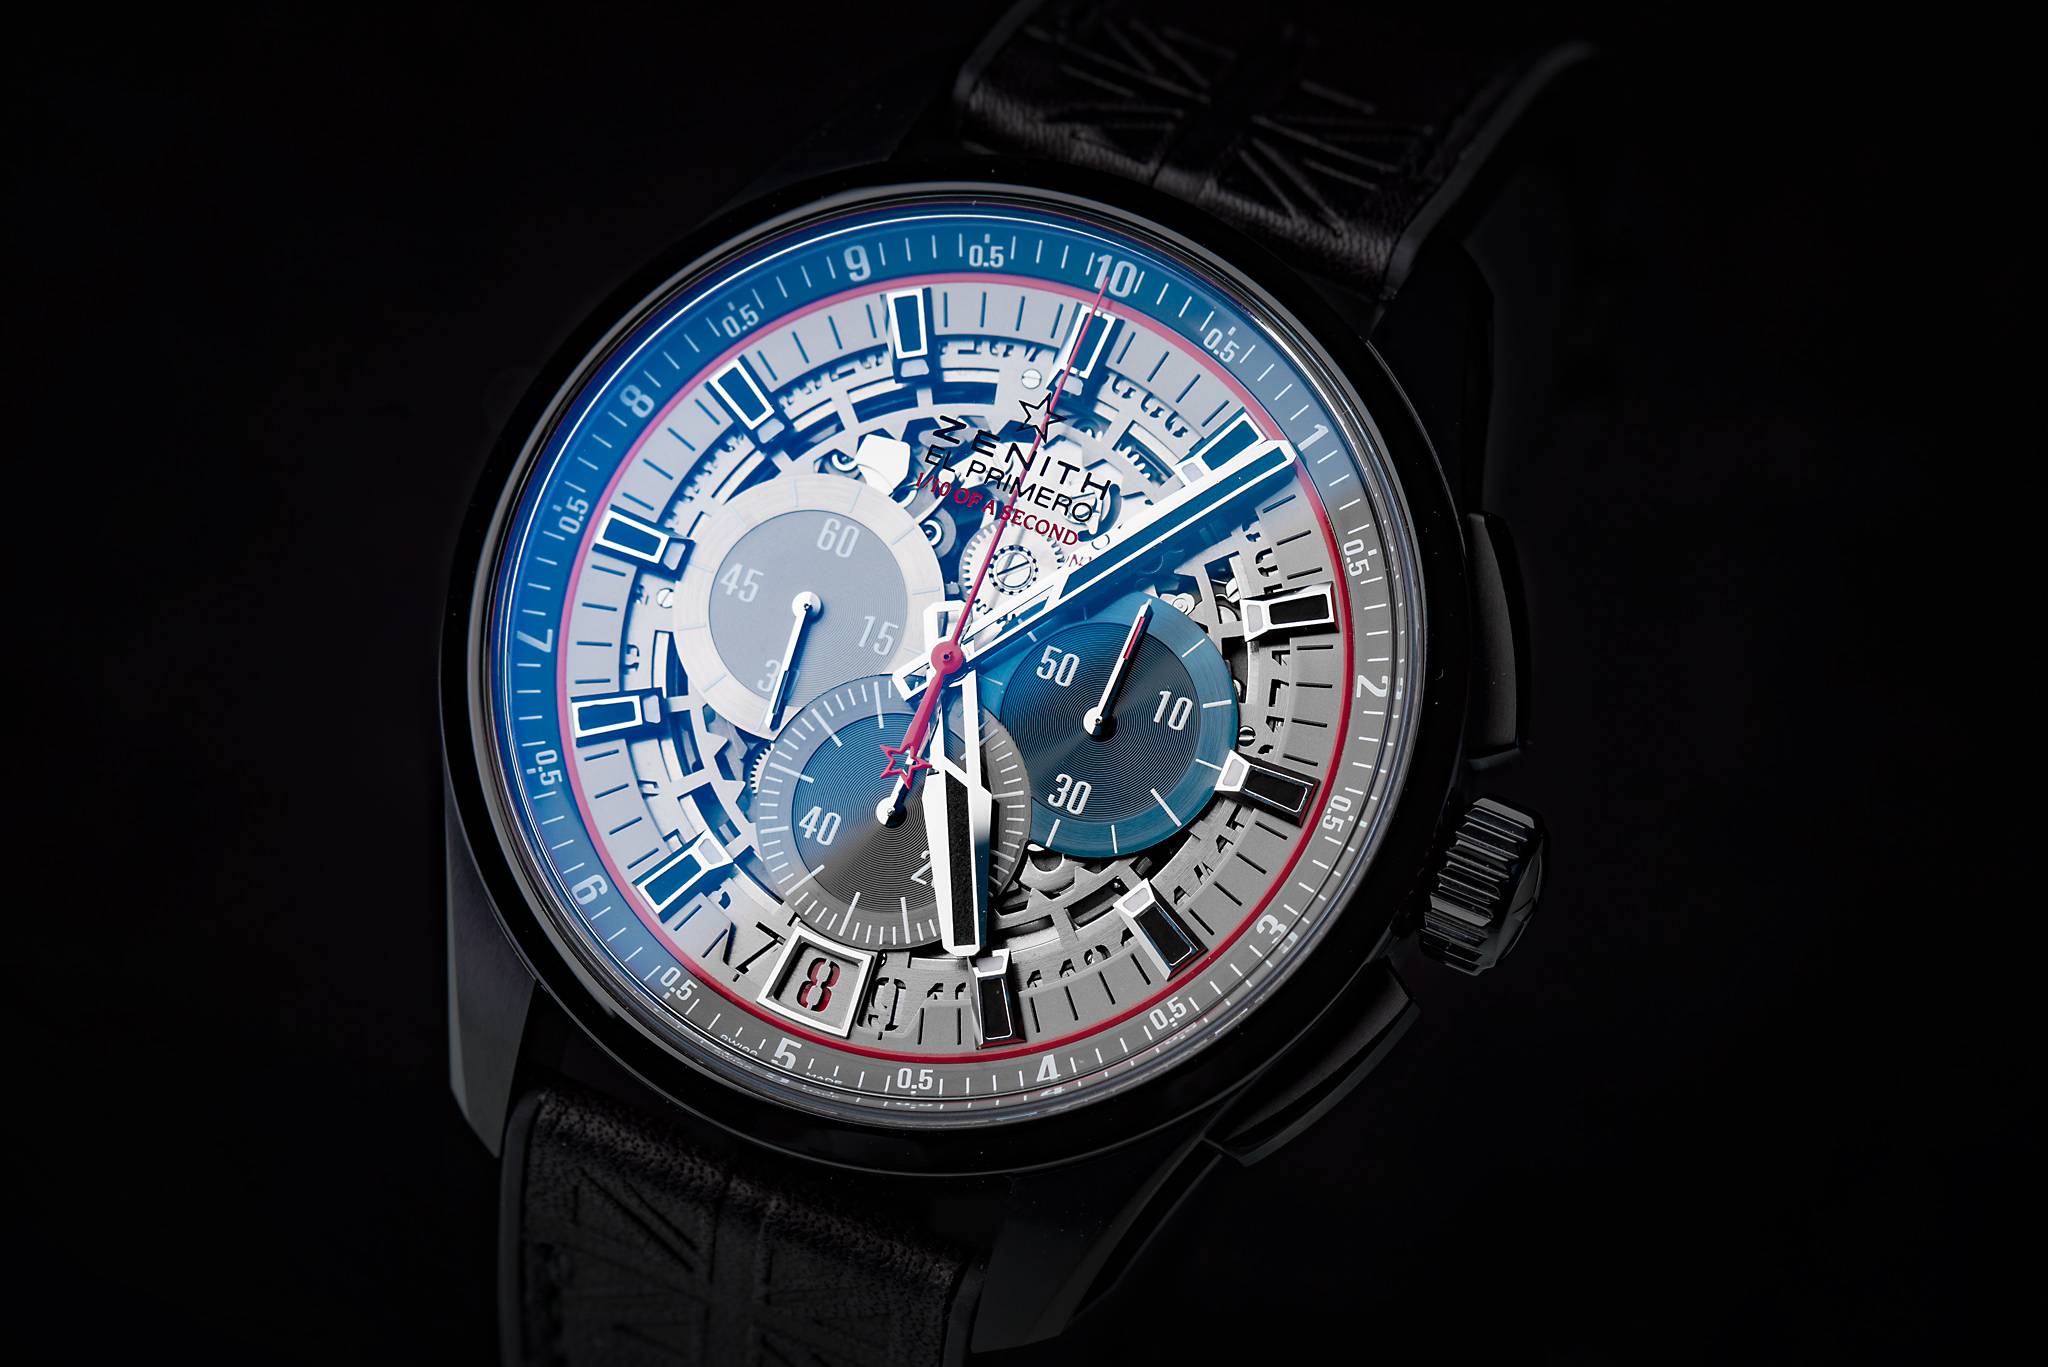 Watch Trends from Baselworld 2015 – DuJour